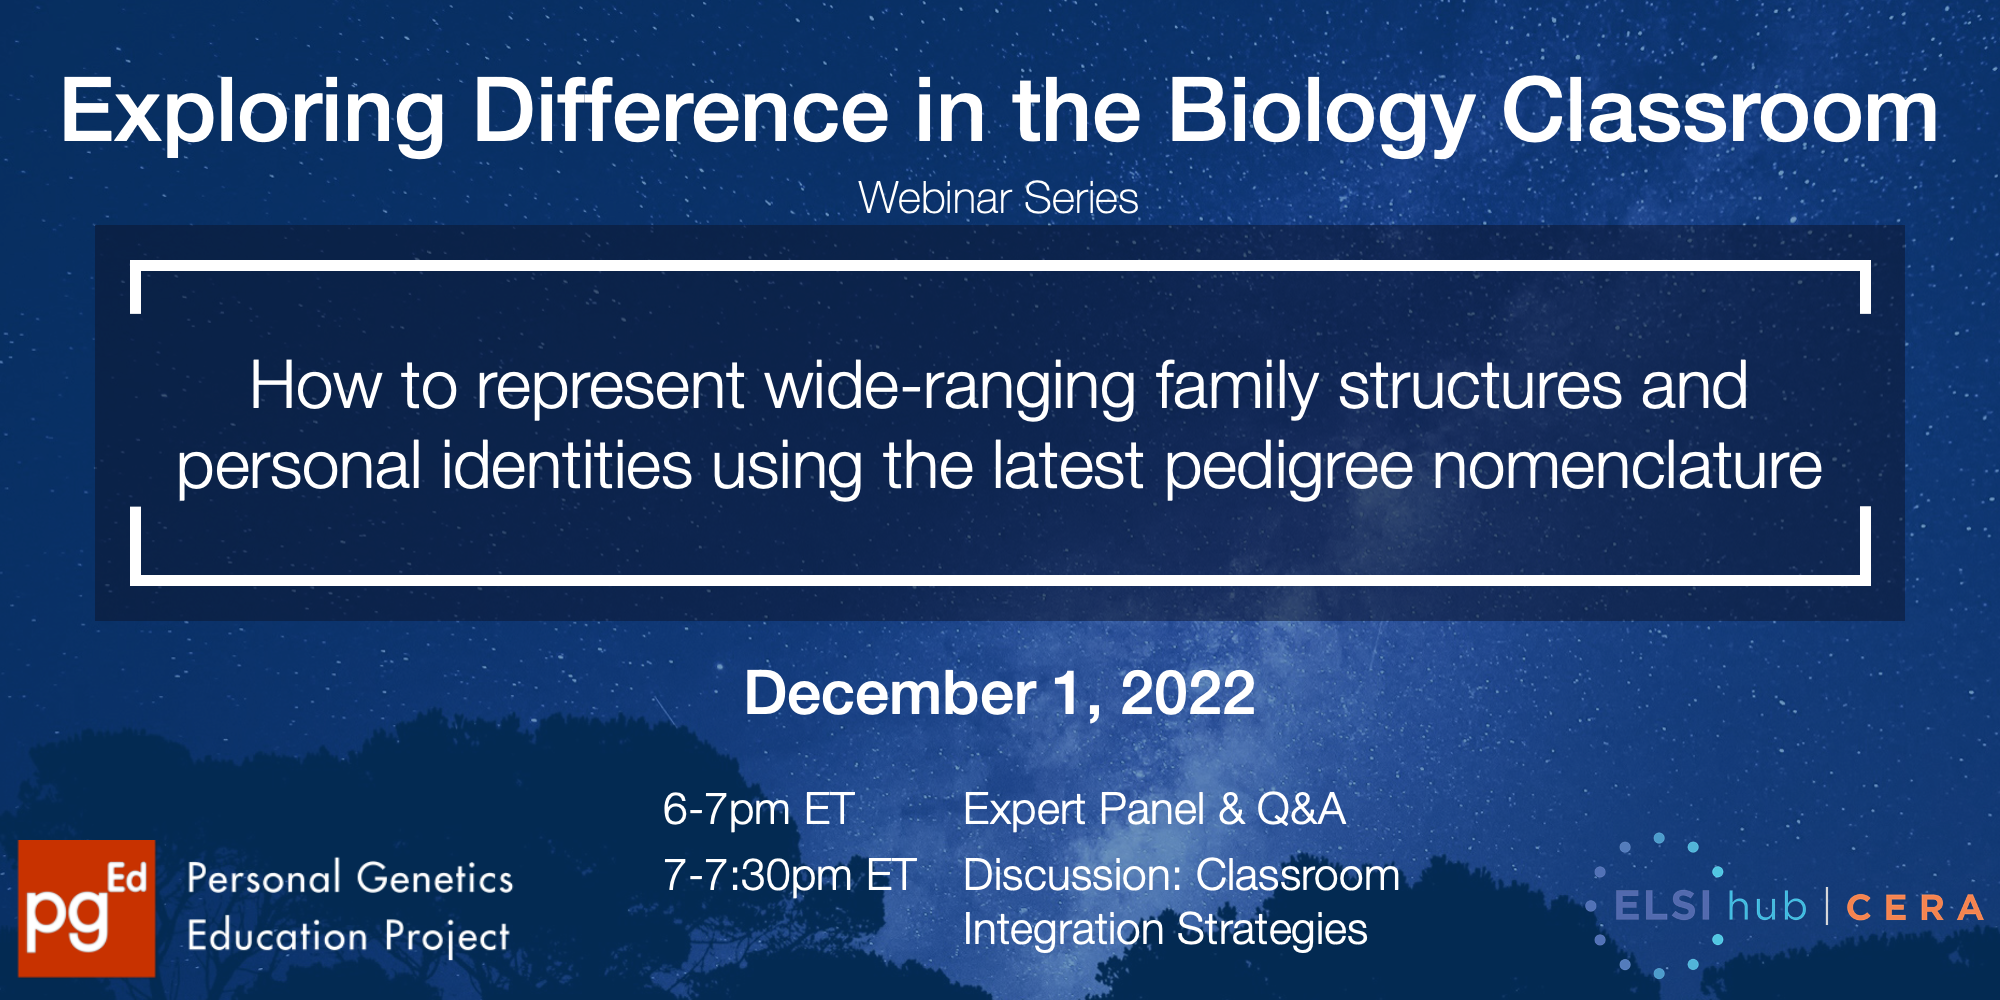 The graphic has a blue tinted background showing a view of the night sky above a tree line. 
In white, the text on the graphic reads the following: "Exploring Difference in the Biology Classroom. Webinar Series. How to represent wide-ranging family structures and personal identities using the latest pedigree nomenclature. December 1, 2022. 6-7pm ET Expert Panel & Q&A. 7-7:30pm ET Discussion: Classroom Integration Strategies."
In the left bottom corner is our pgEd logo and in the right bottom corner is the logo of ELSIhub, our collaborator on this webinar series. 